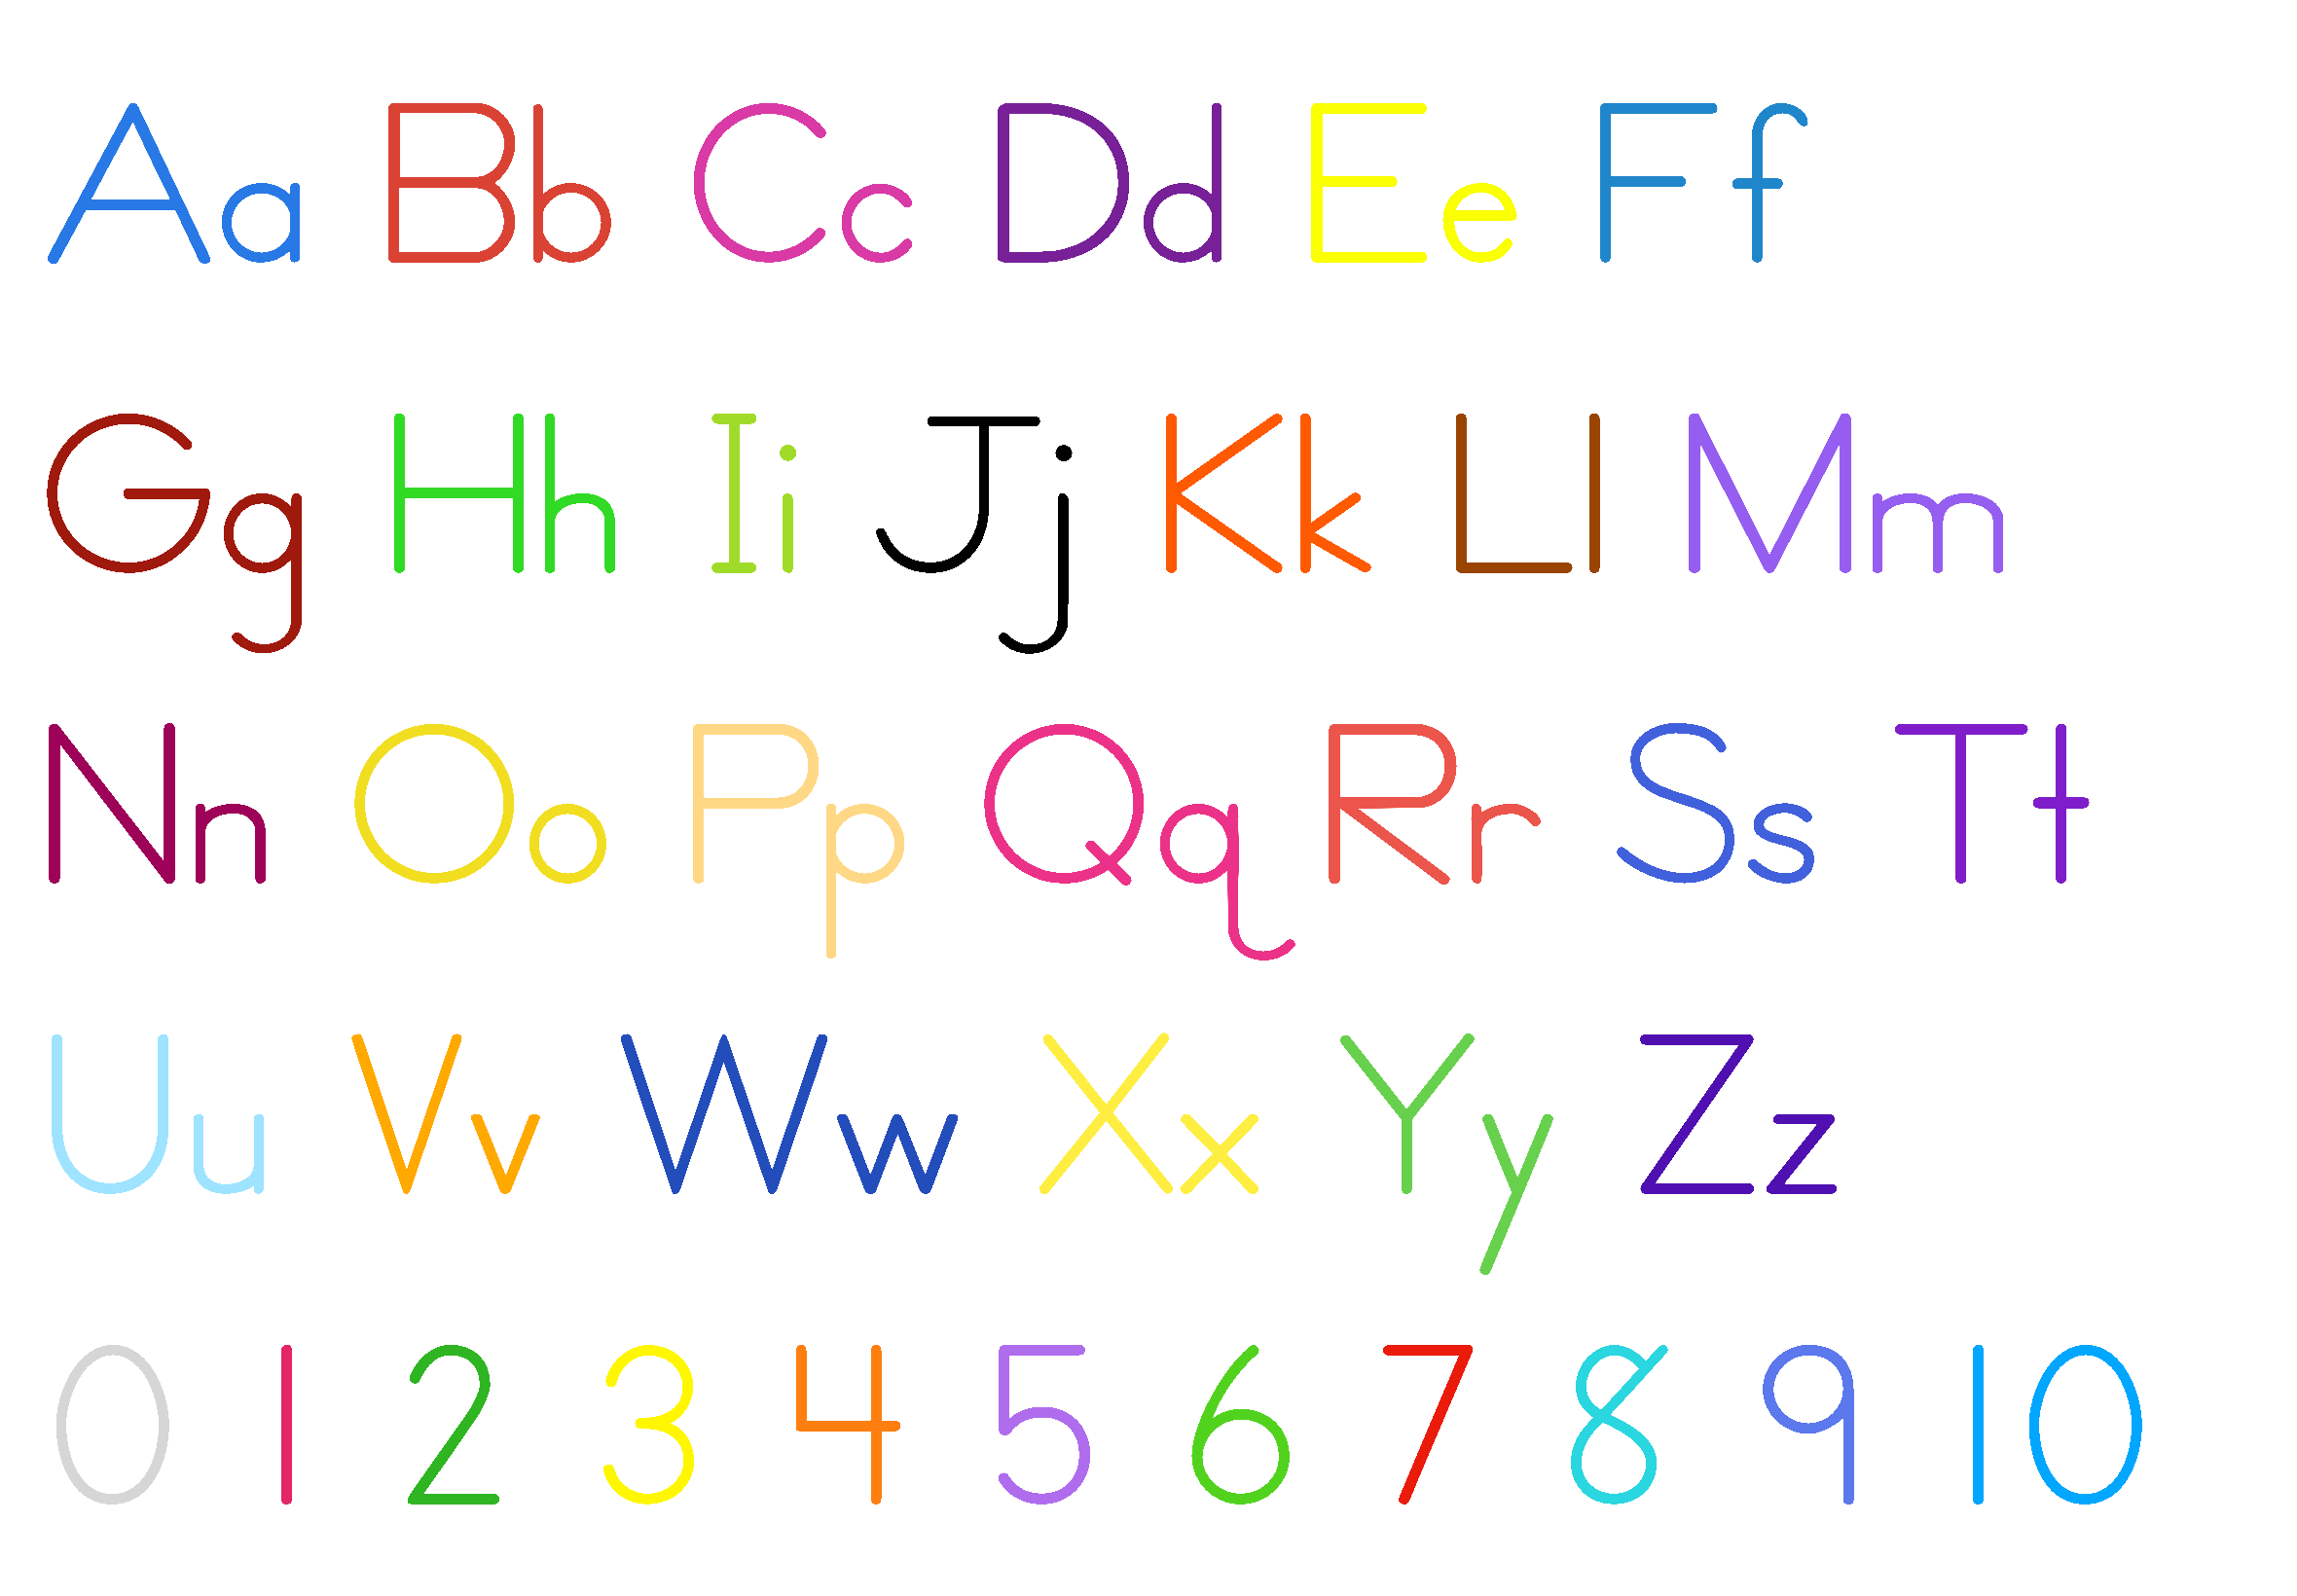 Complete Alphabet Lore Bundle Uppercase Lowercase & Number 